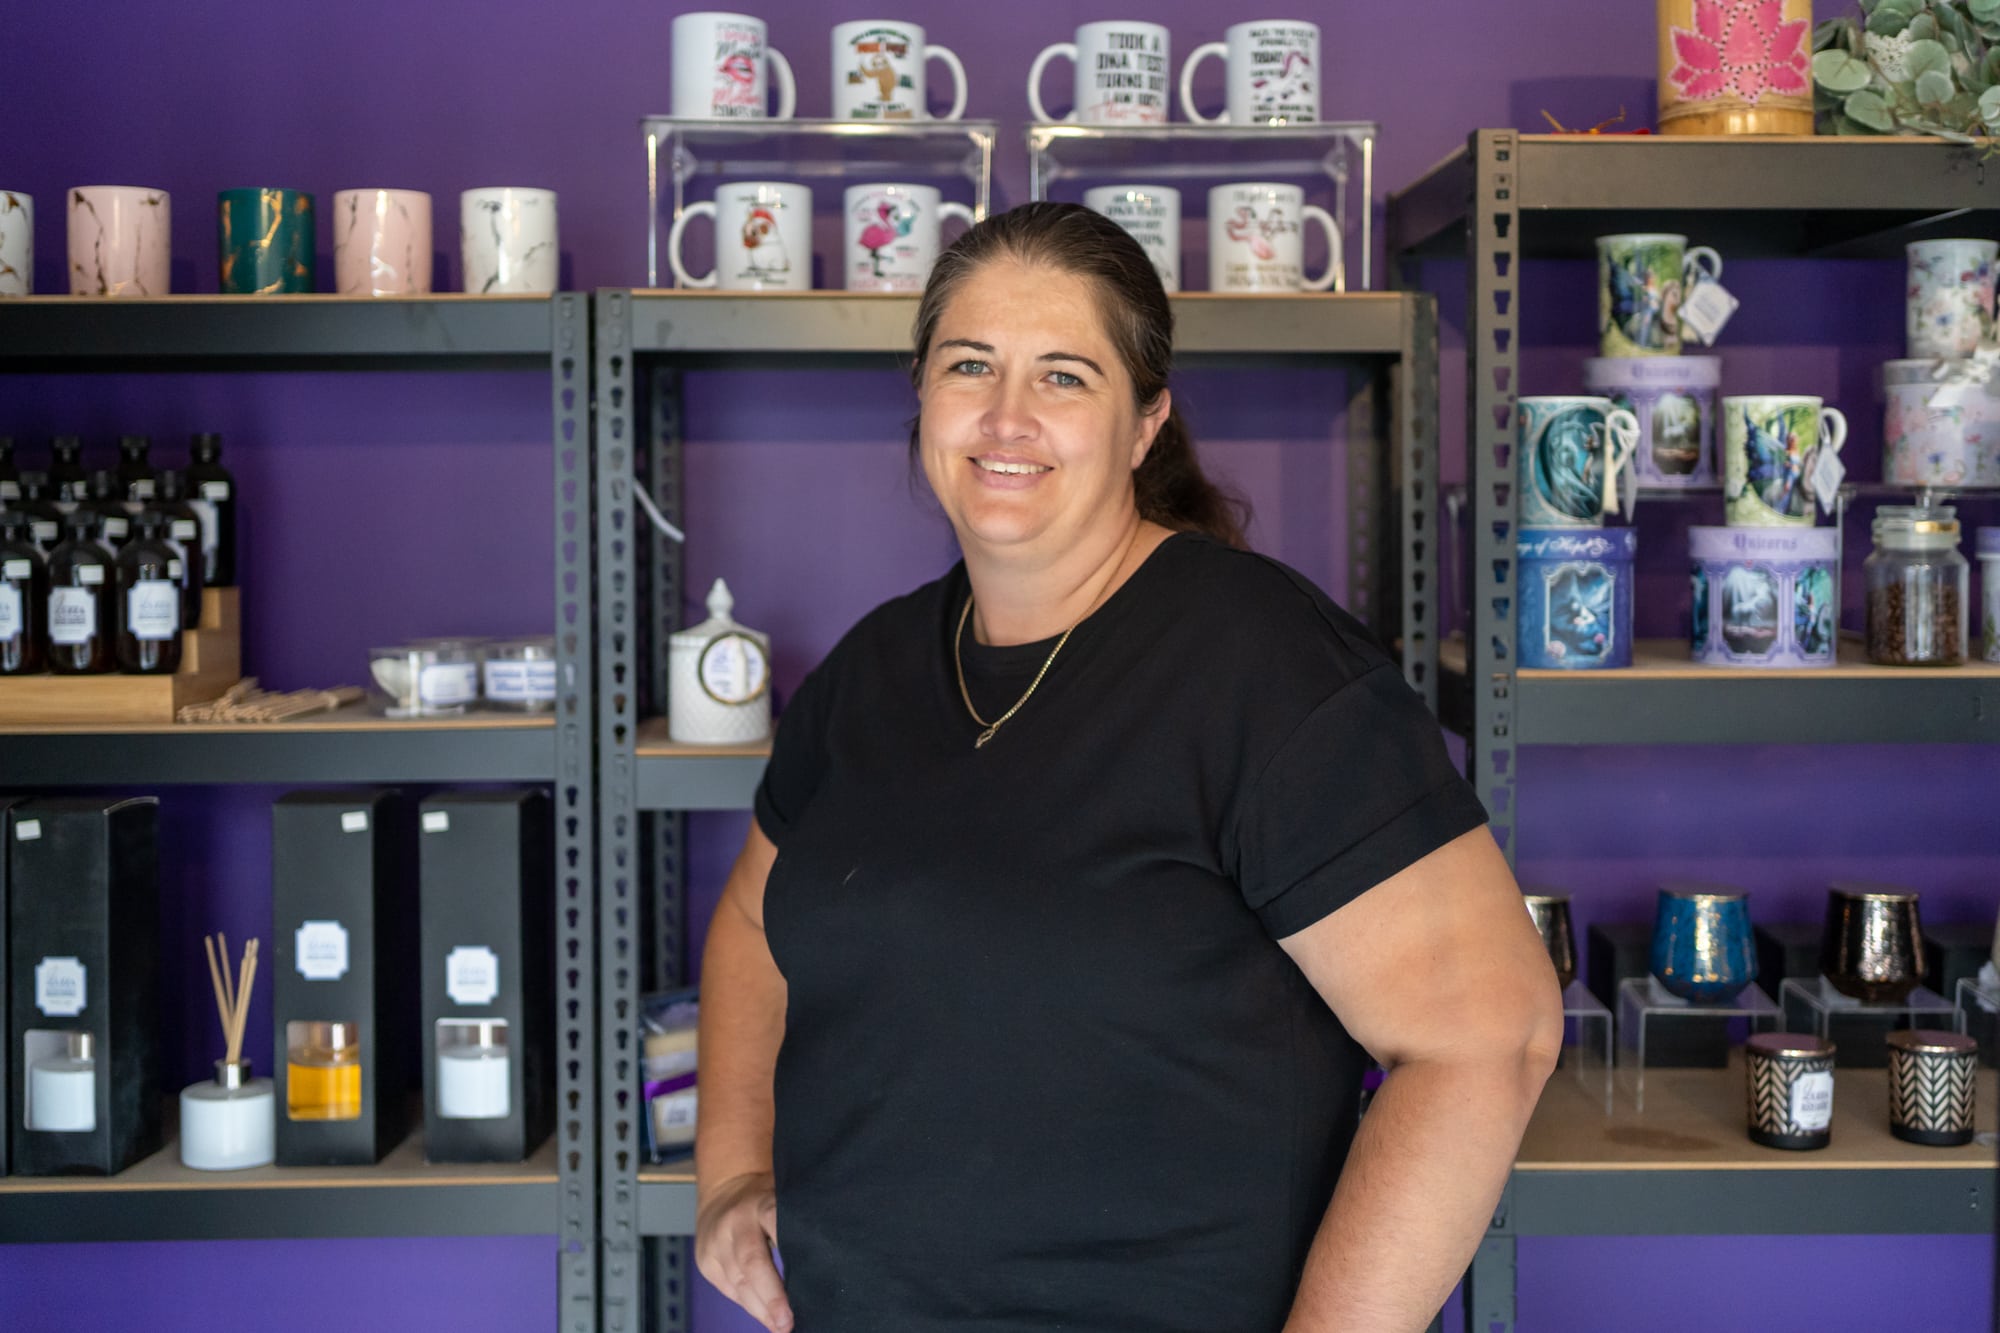 A women with her hair tied in a pony tail wearing a black T shirt standing in front of a purple wall with candles on shelves